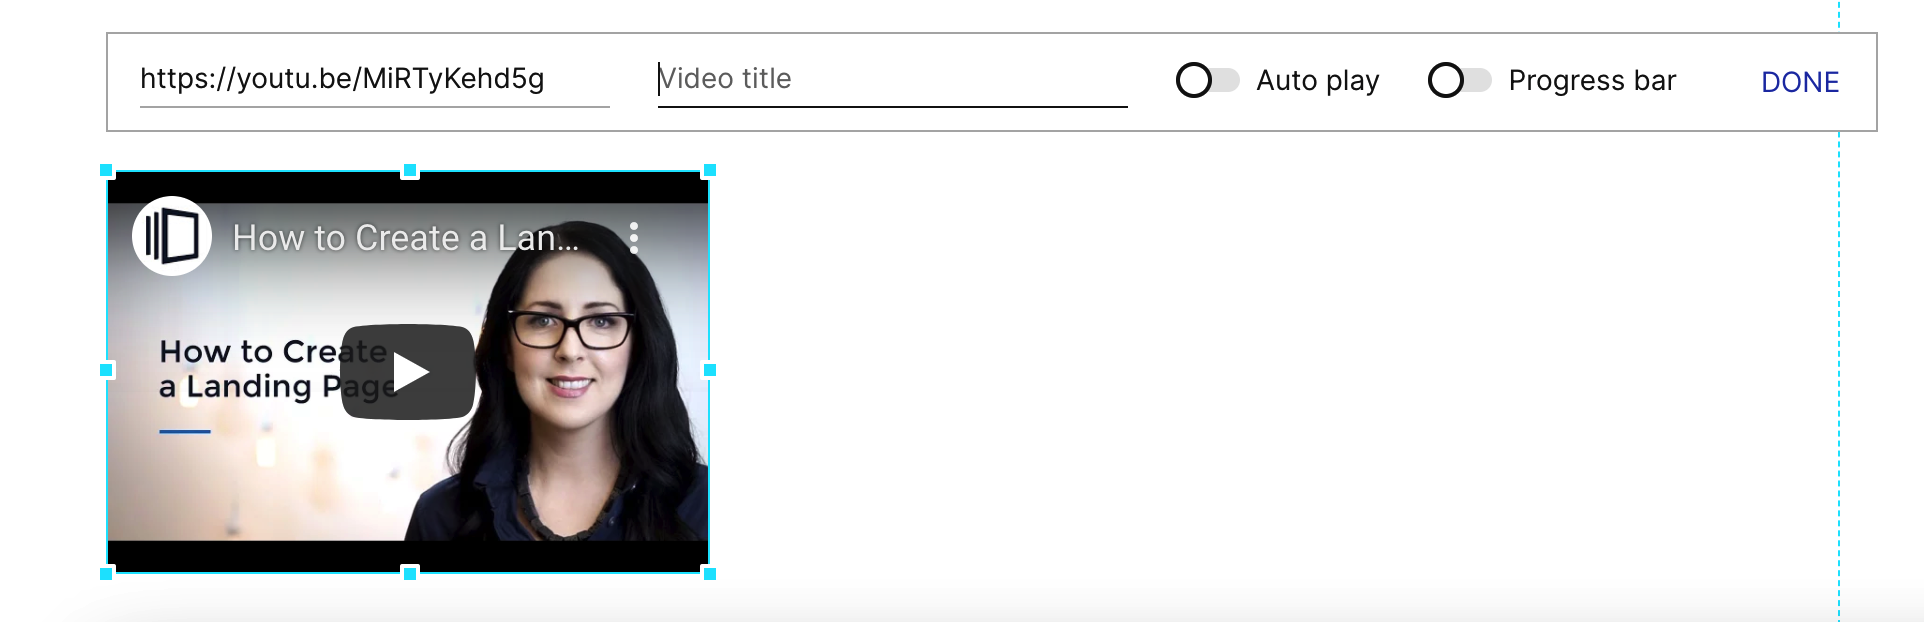 Where to add a title for videos in the Instapage builder